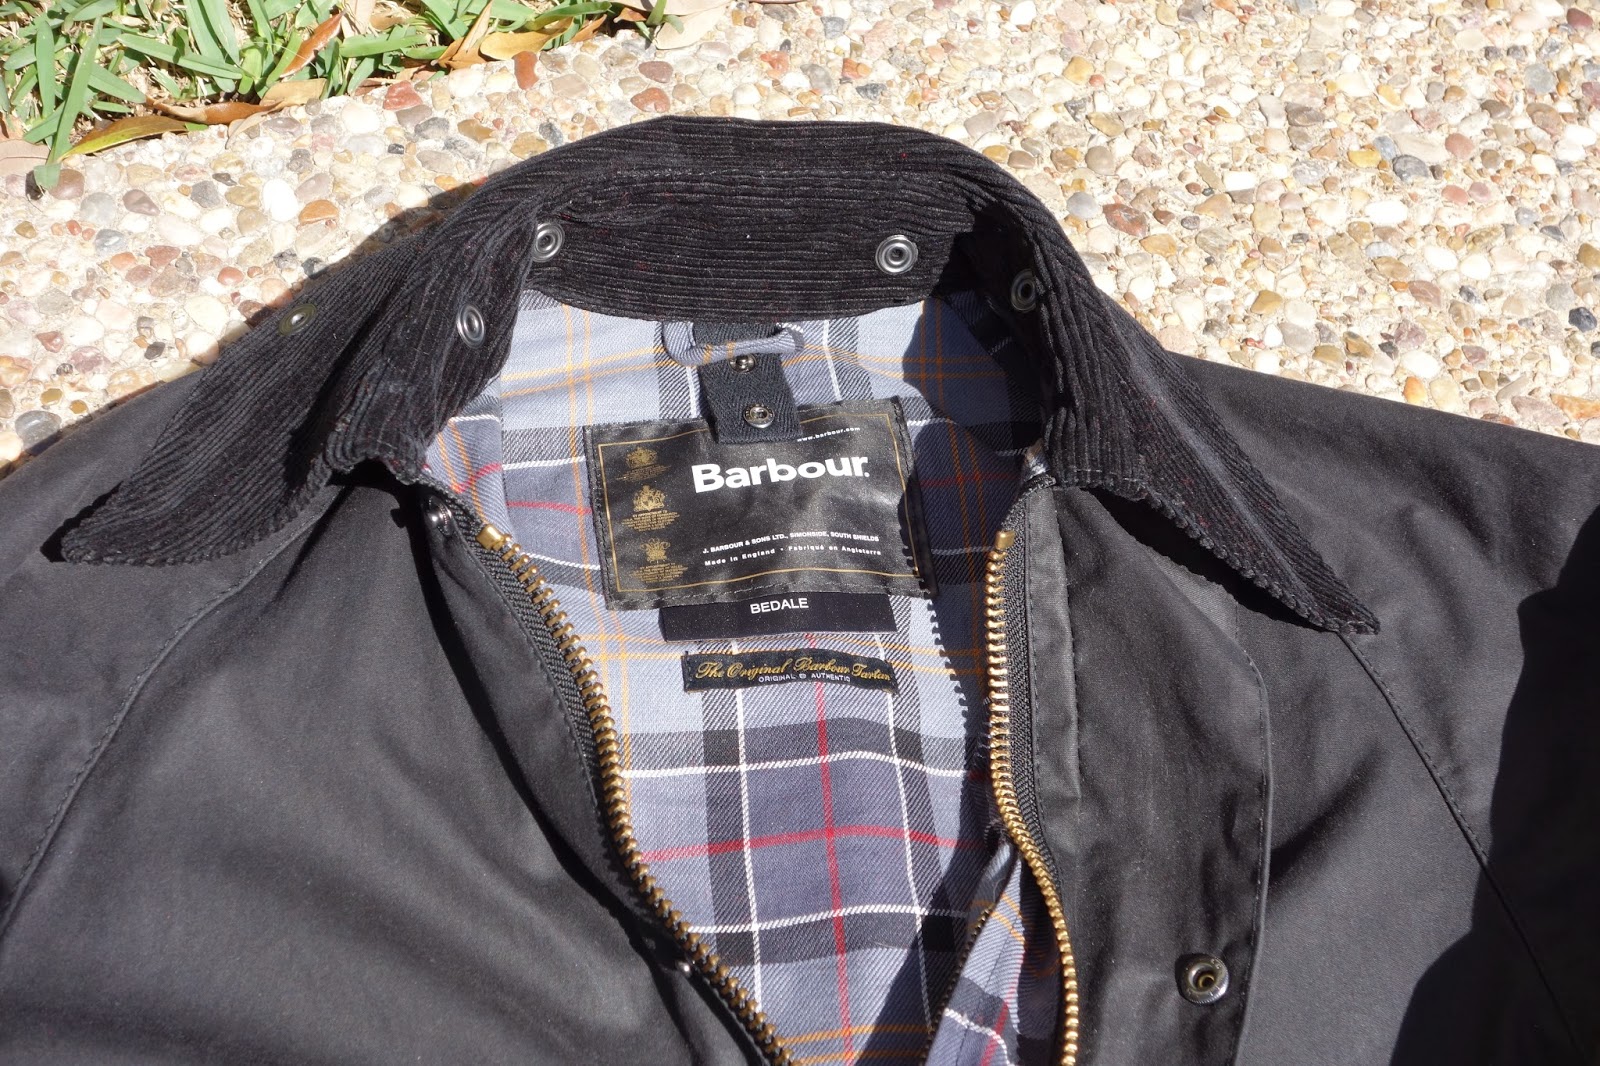 Slone Ranger: My Barbour Bedale